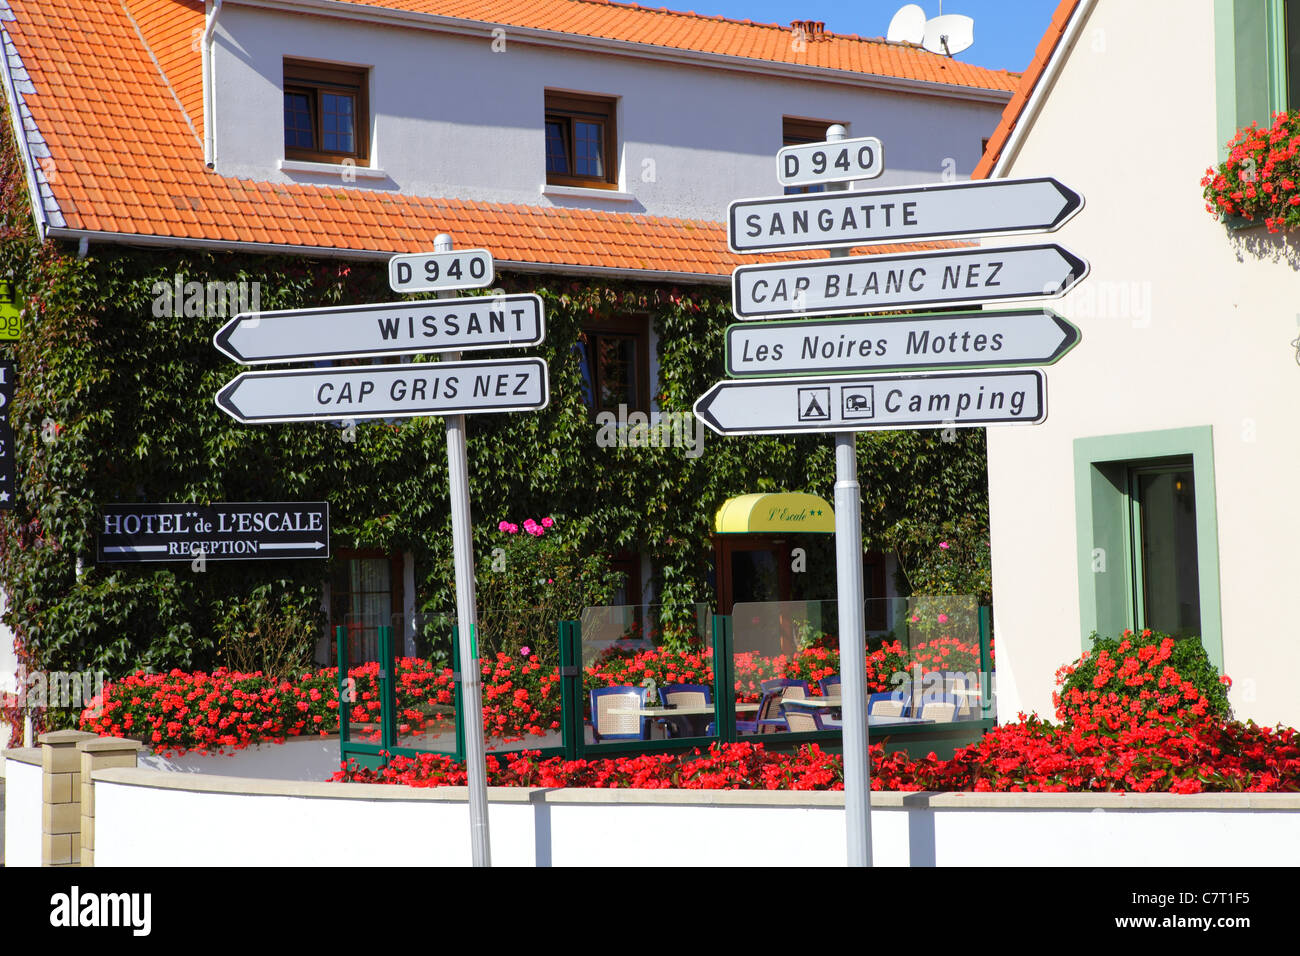 French road direction signs outside Hotel L'Escale Cap Blanc Nez near Calais France Stock Photo